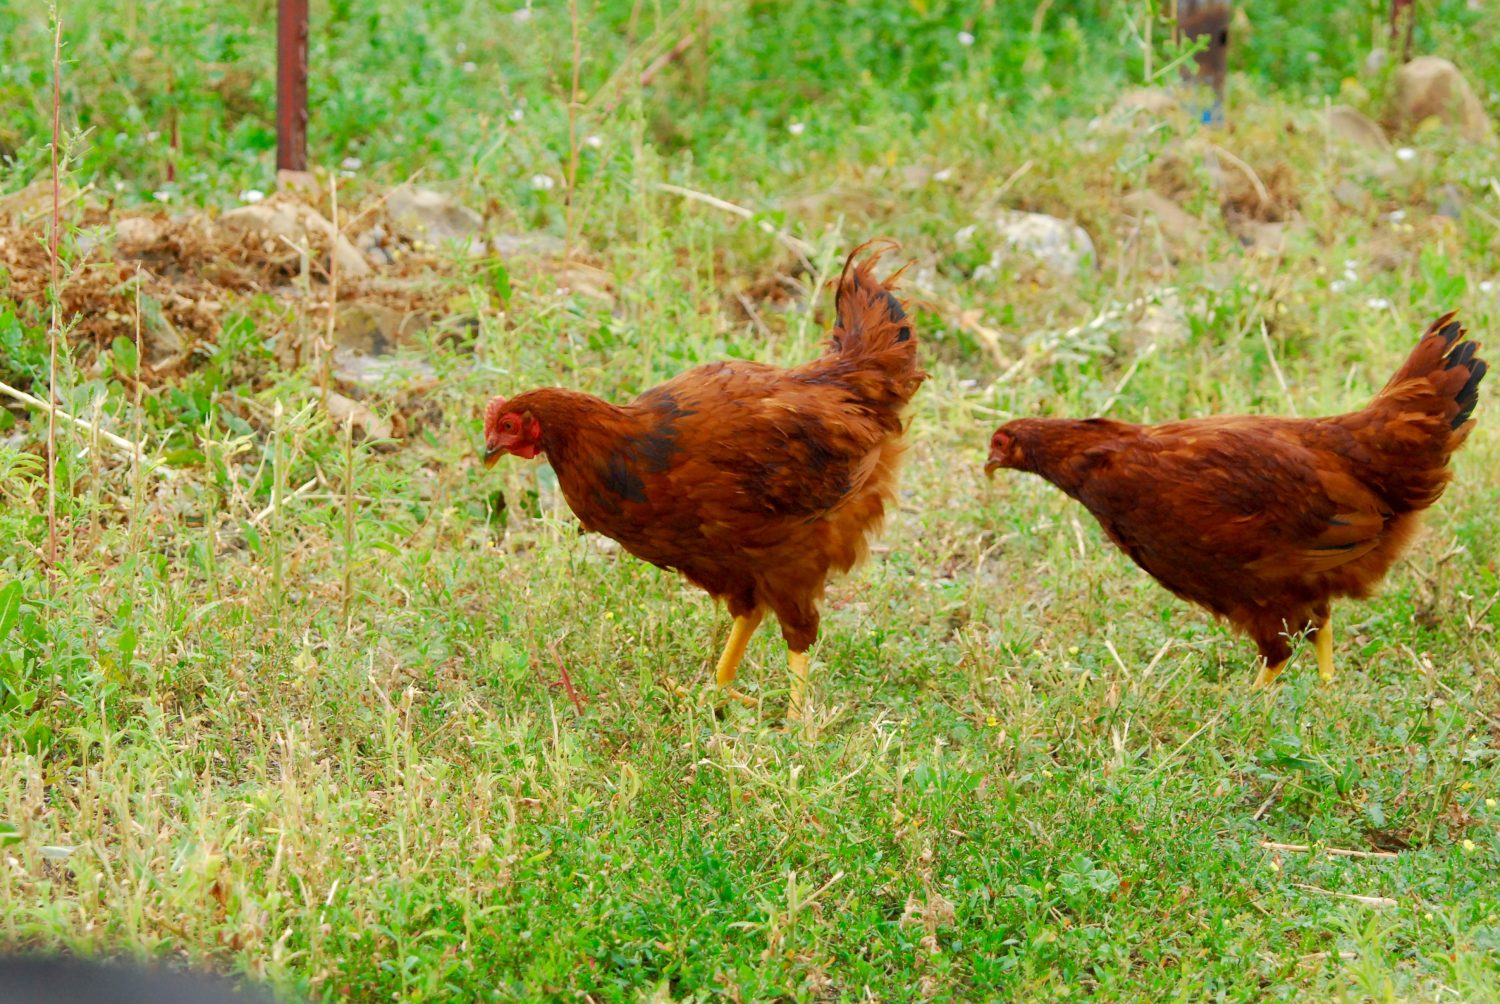 Rhode island red hen and rooster in a field.